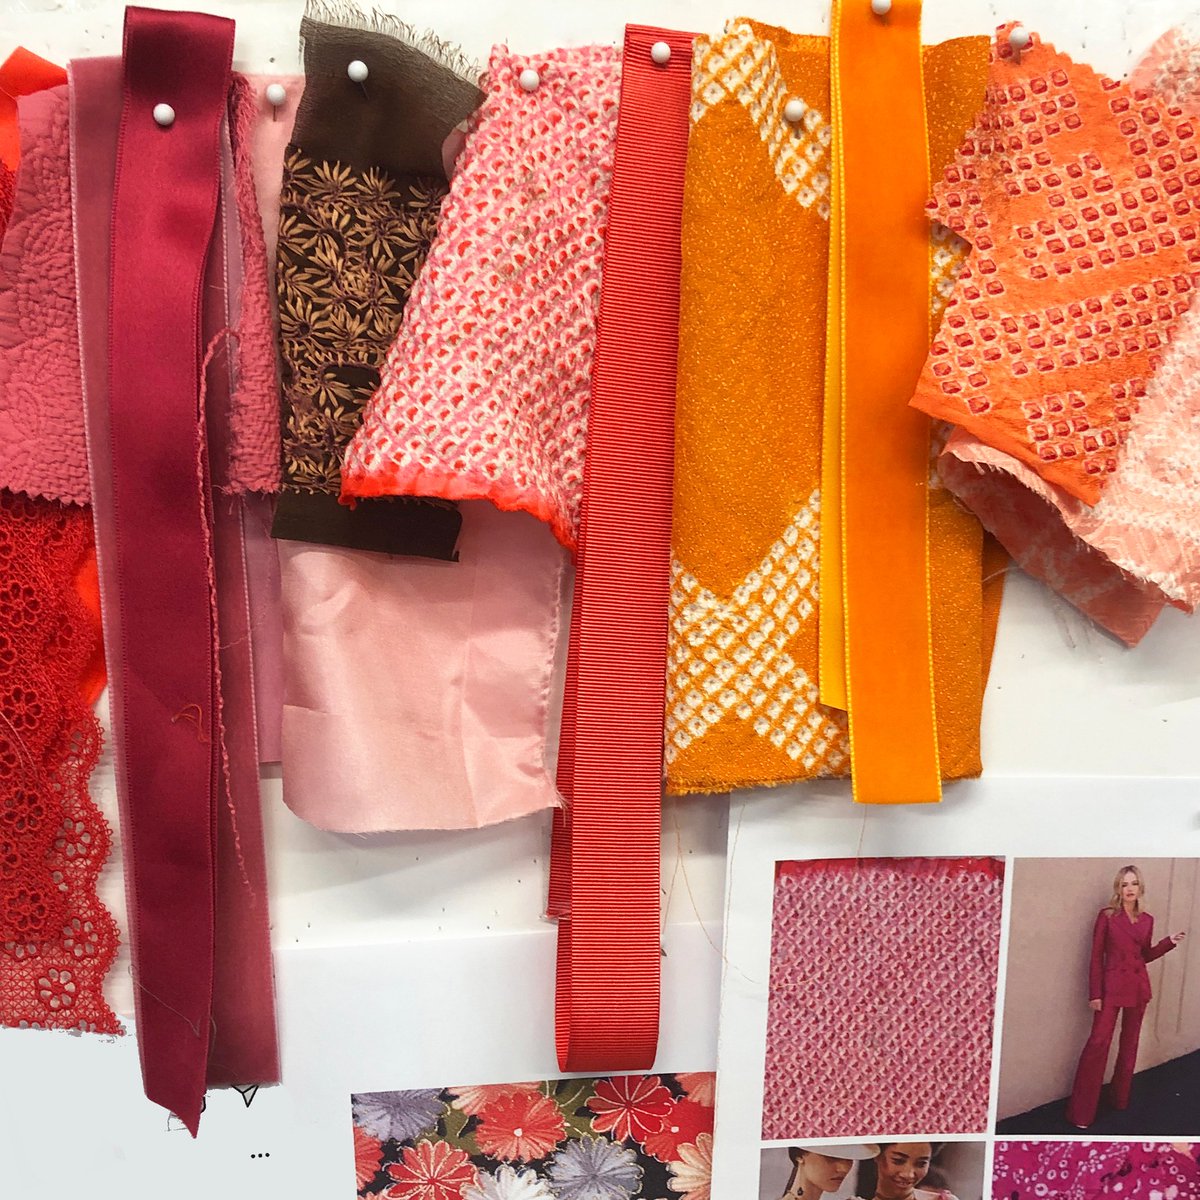 Behind the scenes in the creation of our Spring Summer 2020 collection, beautiful pieces to elevate your everyday. #ethicalfashion #summer2020 #moodboard